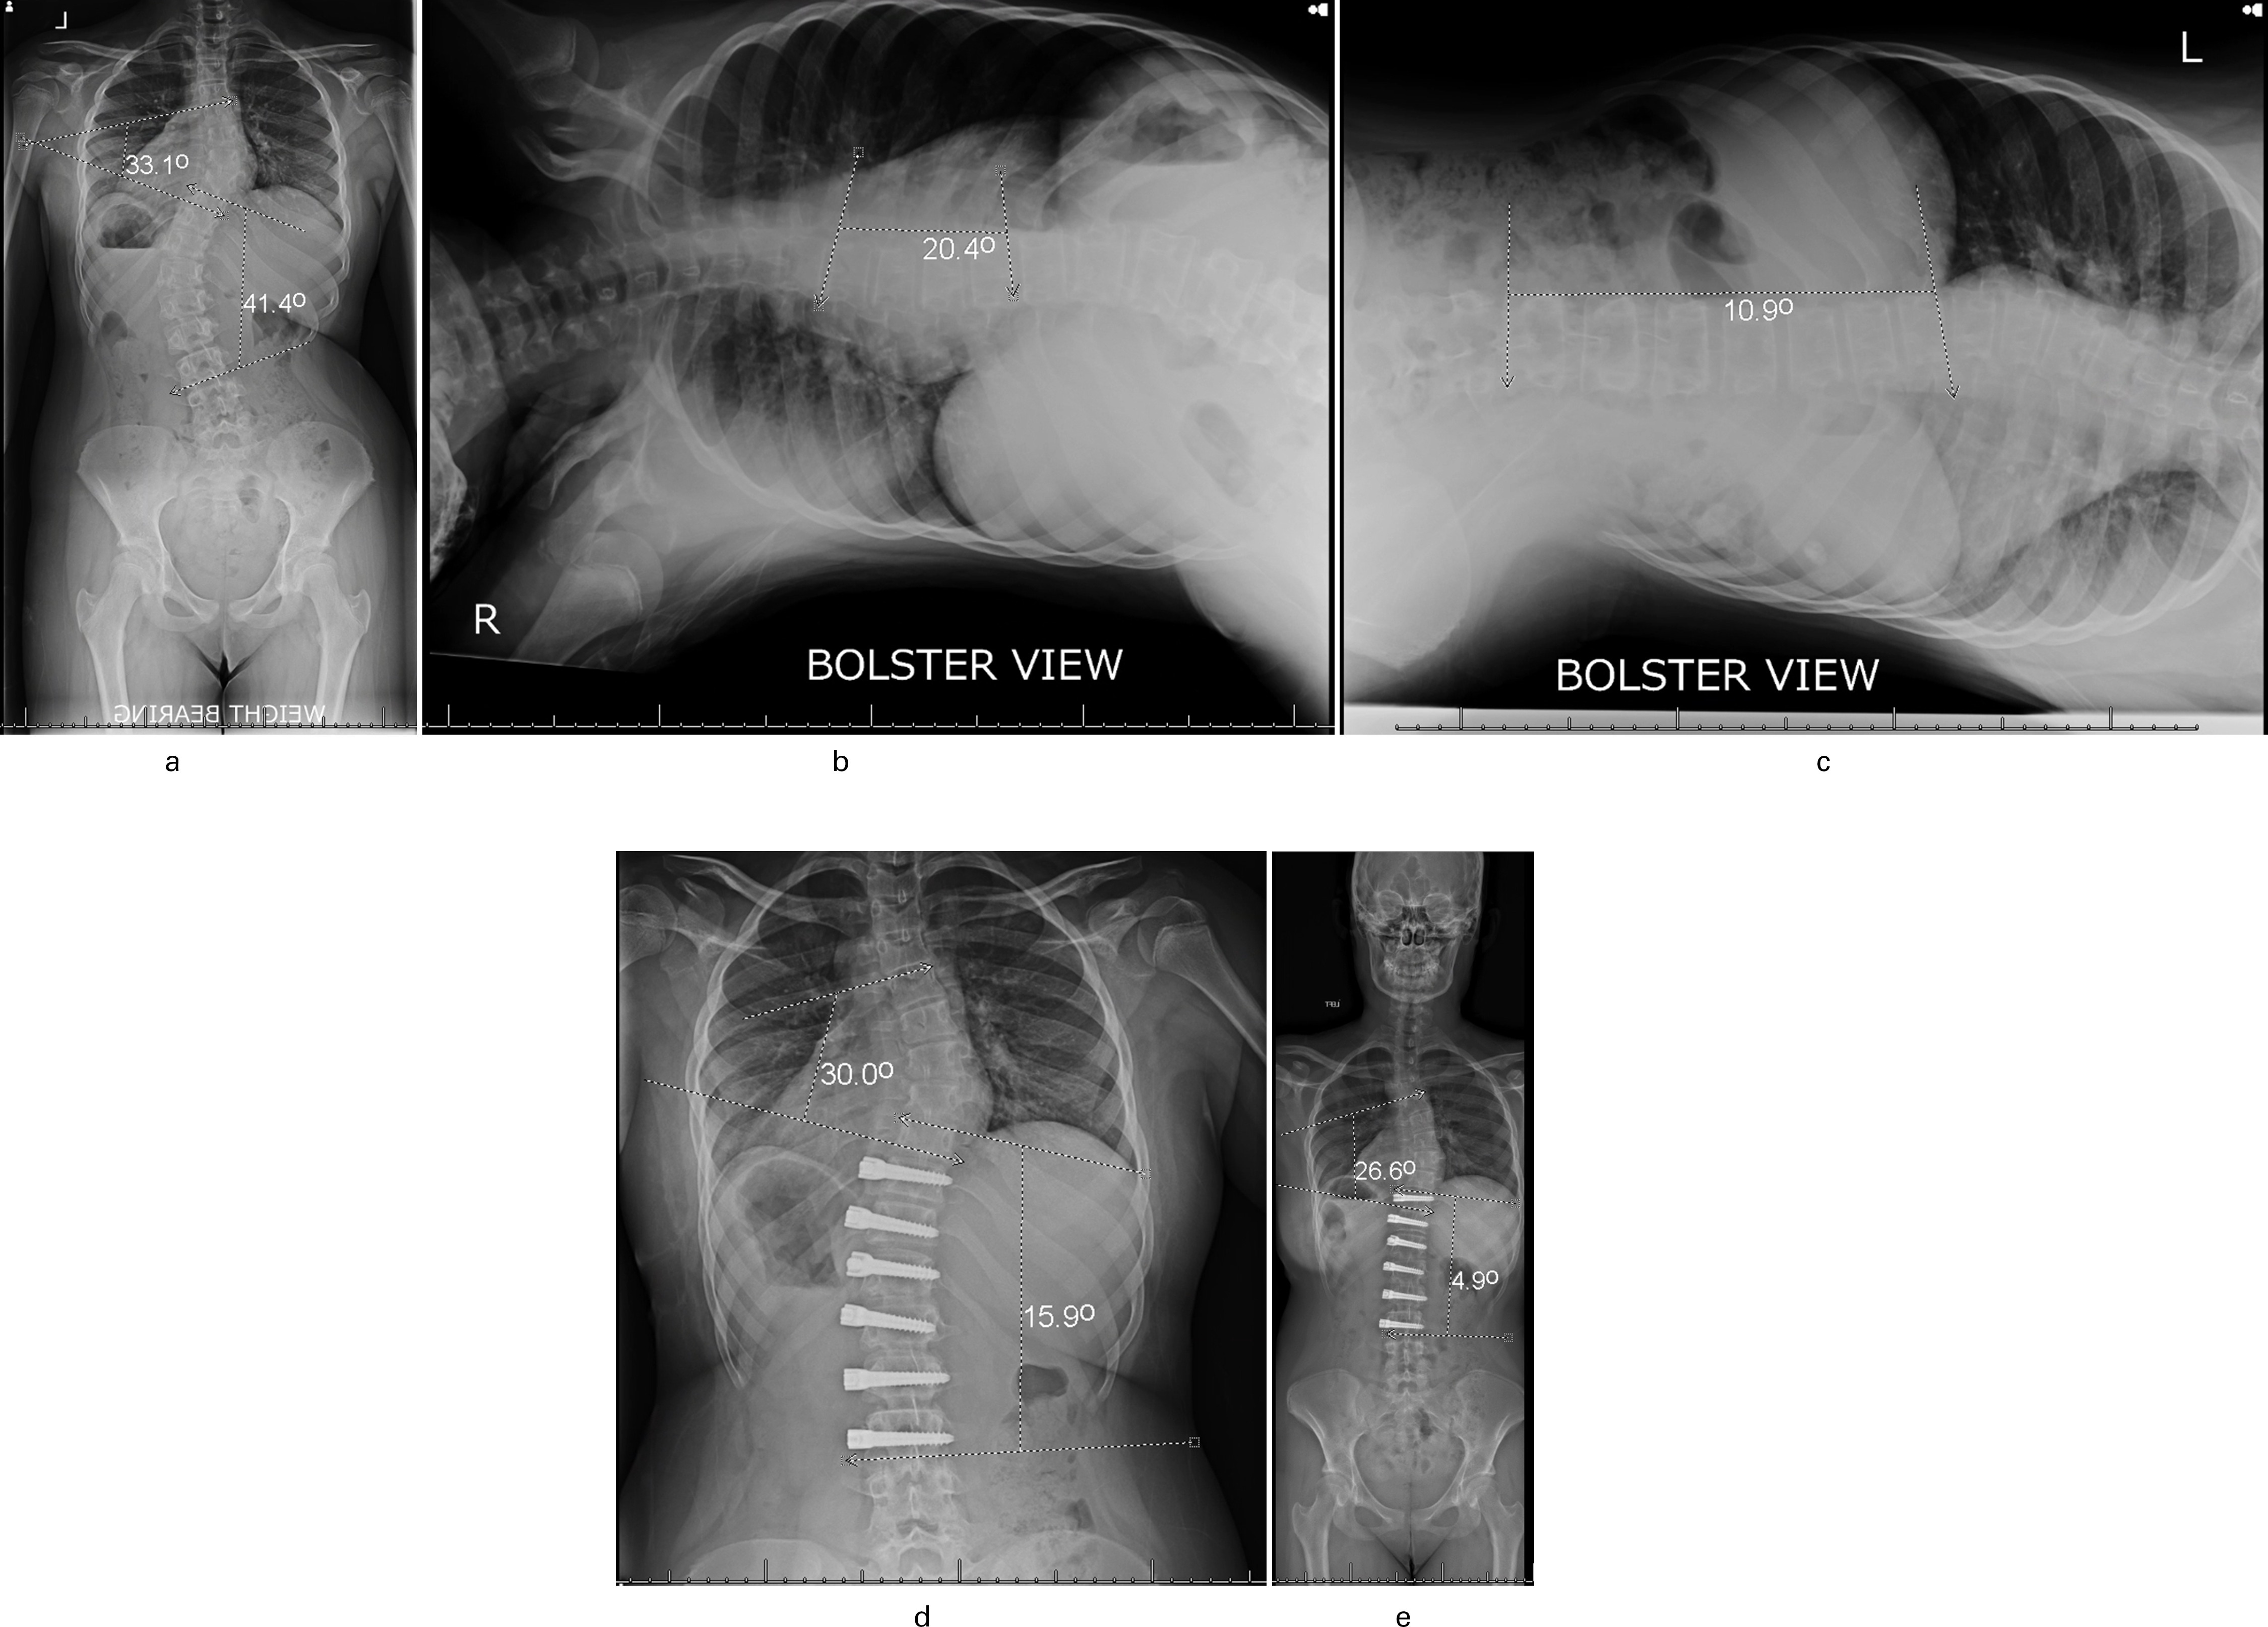 Fig. 3 
          Group Risser grade 0 to 2 (vertebral body tethering growth modulation) 14-year-old female on an anteroposterior whole-spine radiograph. She is Risser 0 and her tri-radiate cartilages are closed. a) There is a main thoracic (MT) Cobb angle of 33.1° and thoracolumbar Cobb angle of 41.4°. b) The Fulcrum Bending radiograph MT unbends to 20.4° and c) the Fulcrum Bending radiograph thoracolumbar (TL) unbends to 10.9° six weeks postoperatively. d) There are preoperative Cobb angles of MT = 30° and TL = 15.9°. e) Radiographs taken at five years postoperatively show further improvement with MT = 26.6° TL = 4.9°
        